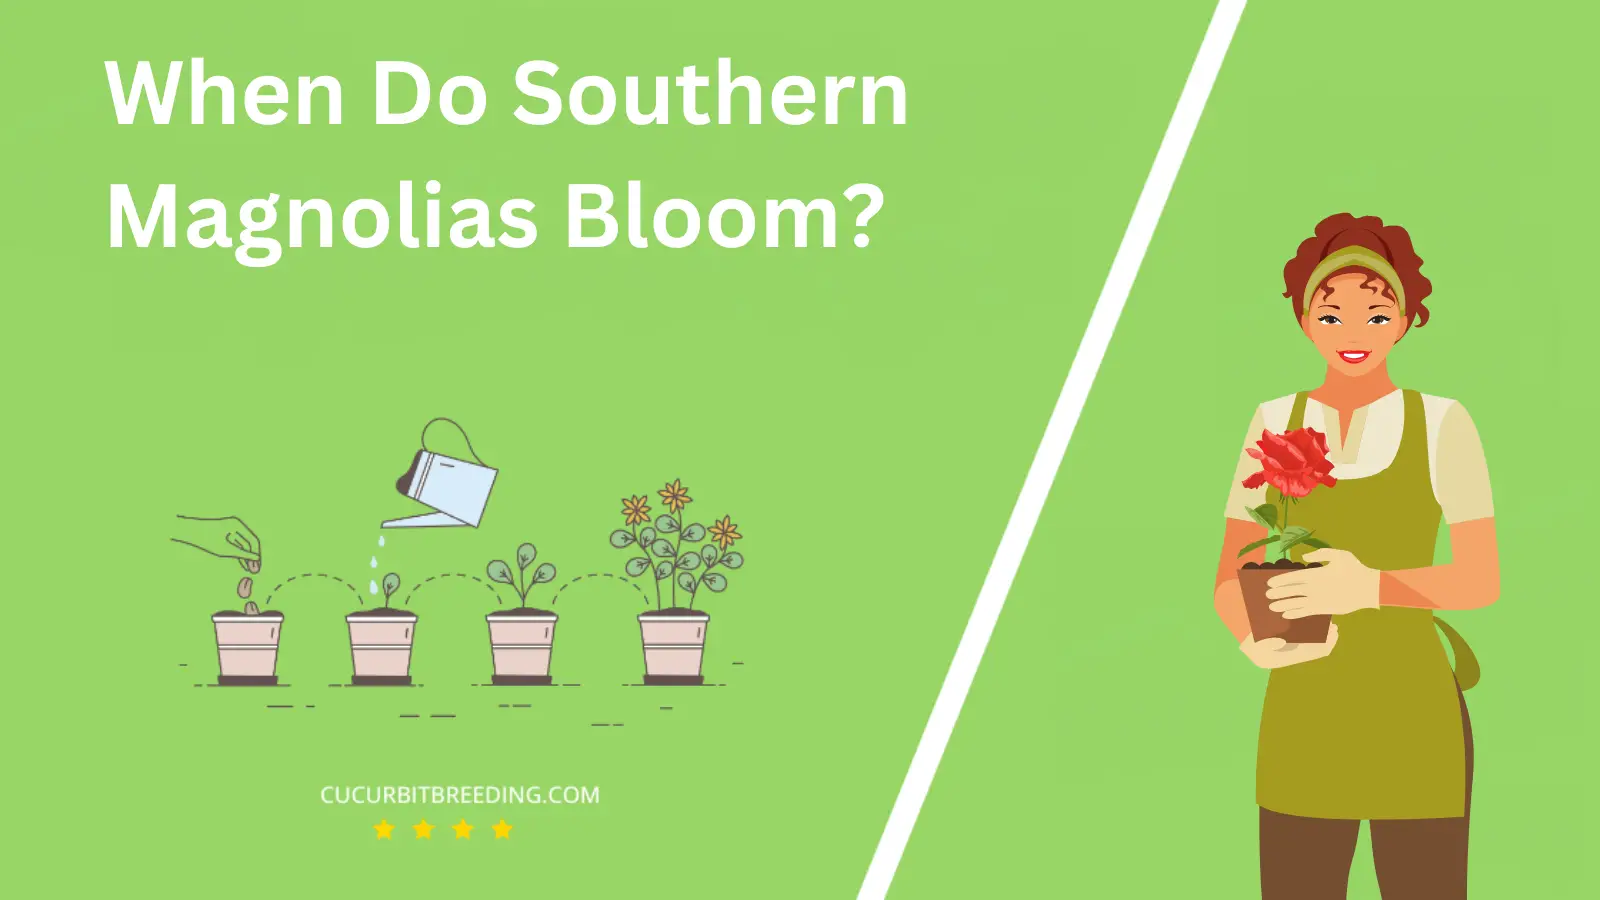 When Do Southern Magnolias Bloom?